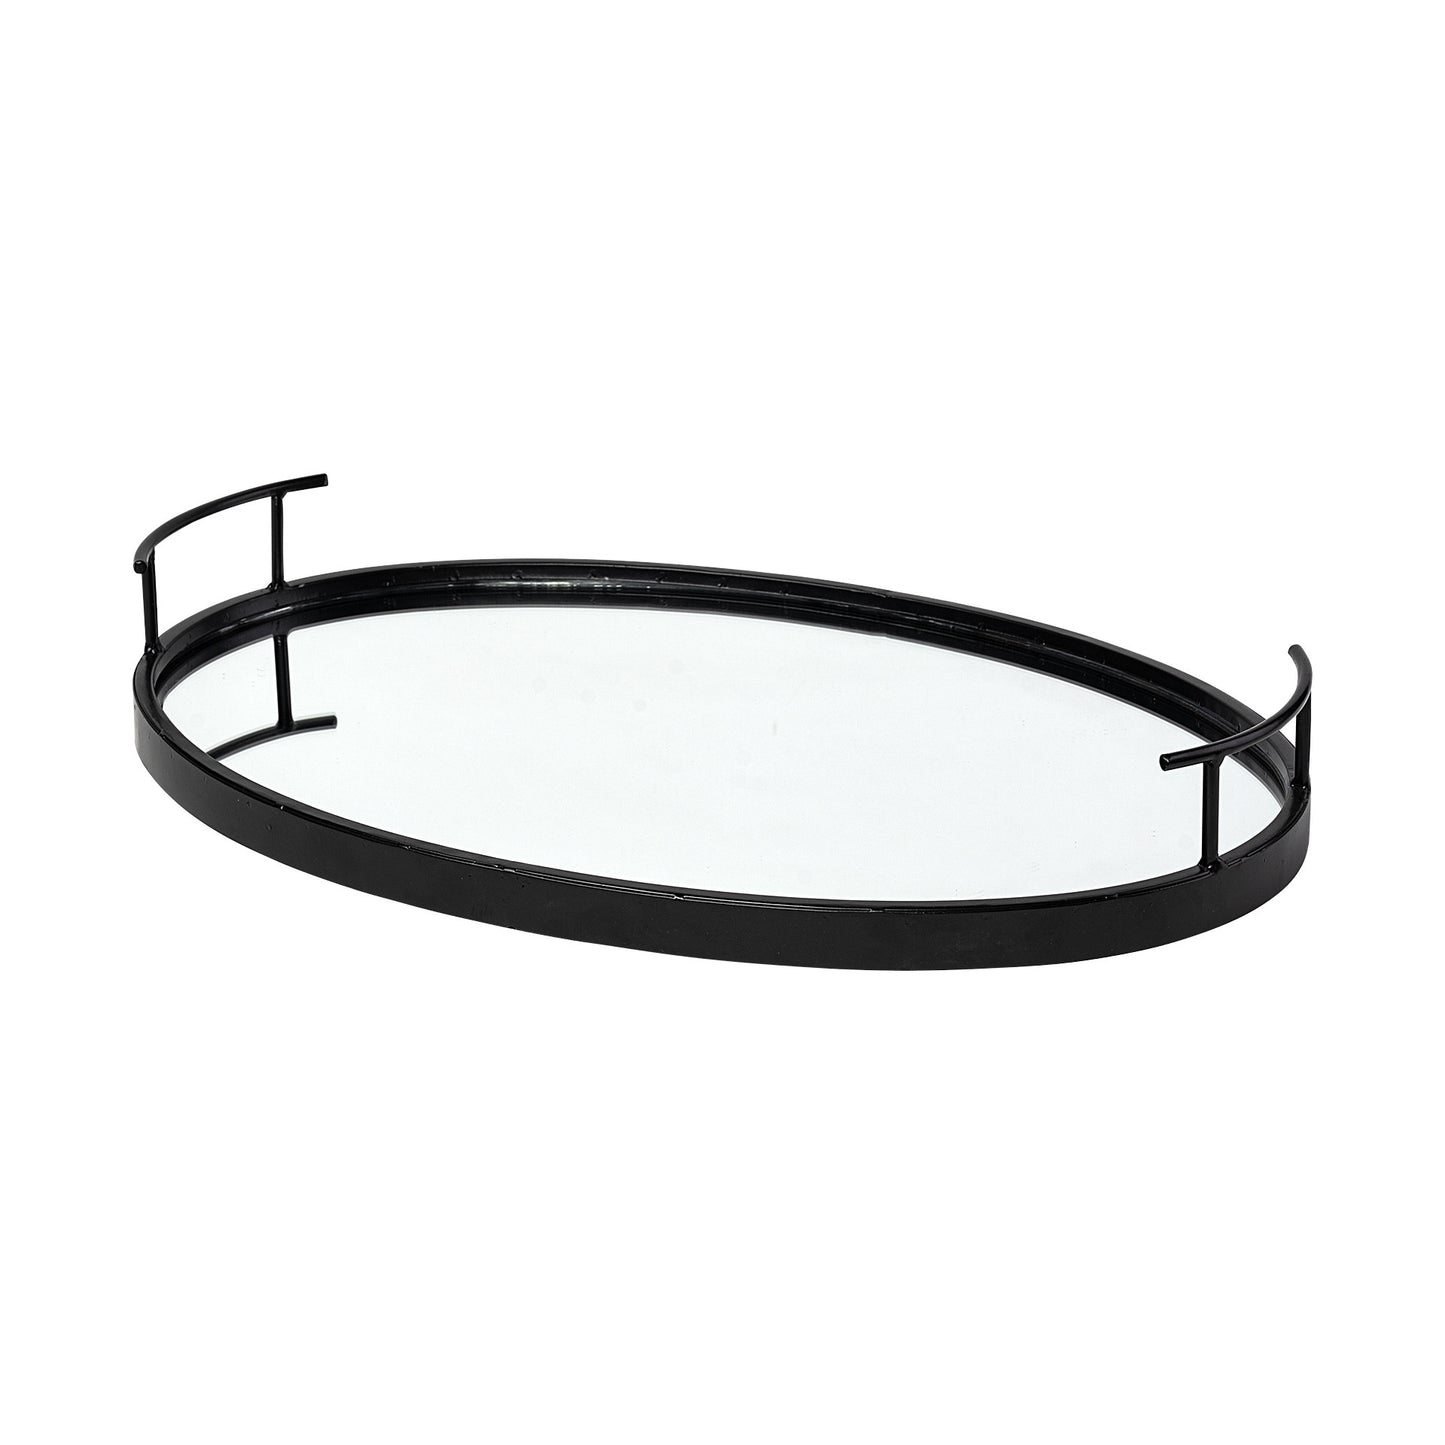 Matte Black Metal With Two Handle Both Sides And Mirrored Glass Bottom Tray By Homeroots